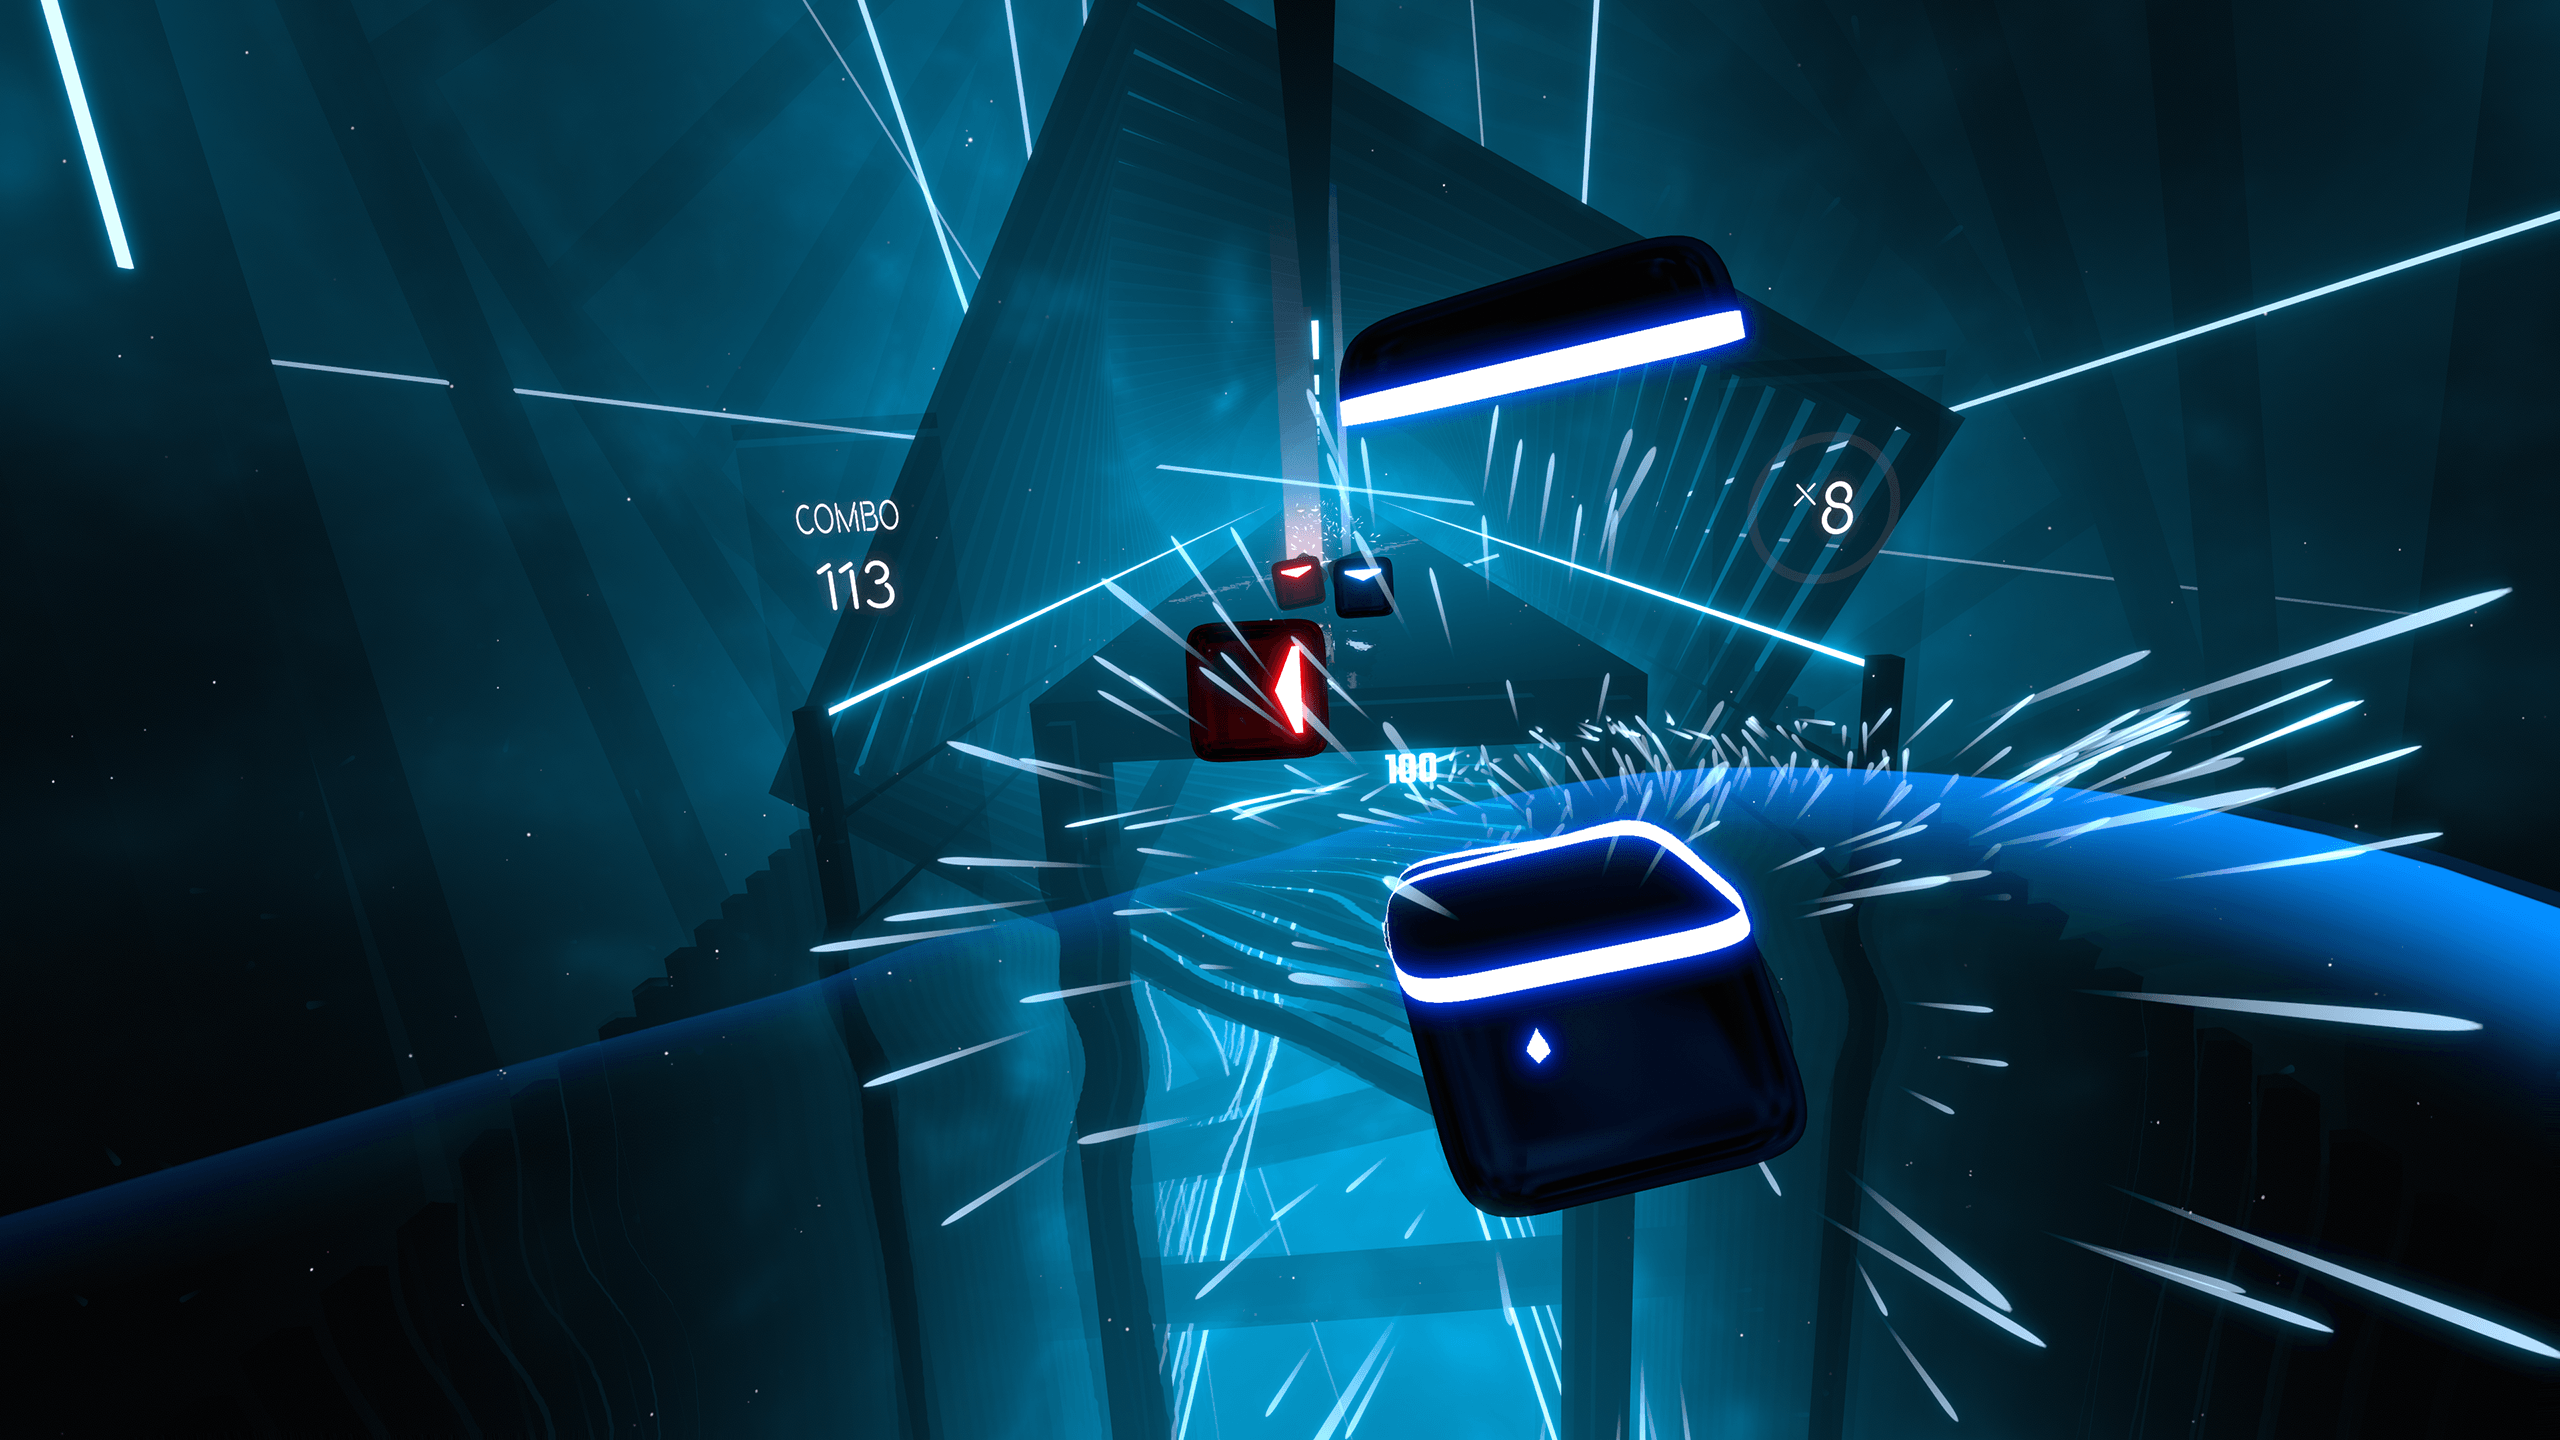 Beat Saber Wallpapers Wallpaper Cave If you're looking for the best saber wallpaper then wallpapertag is the place to be. beat saber wallpapers wallpaper cave